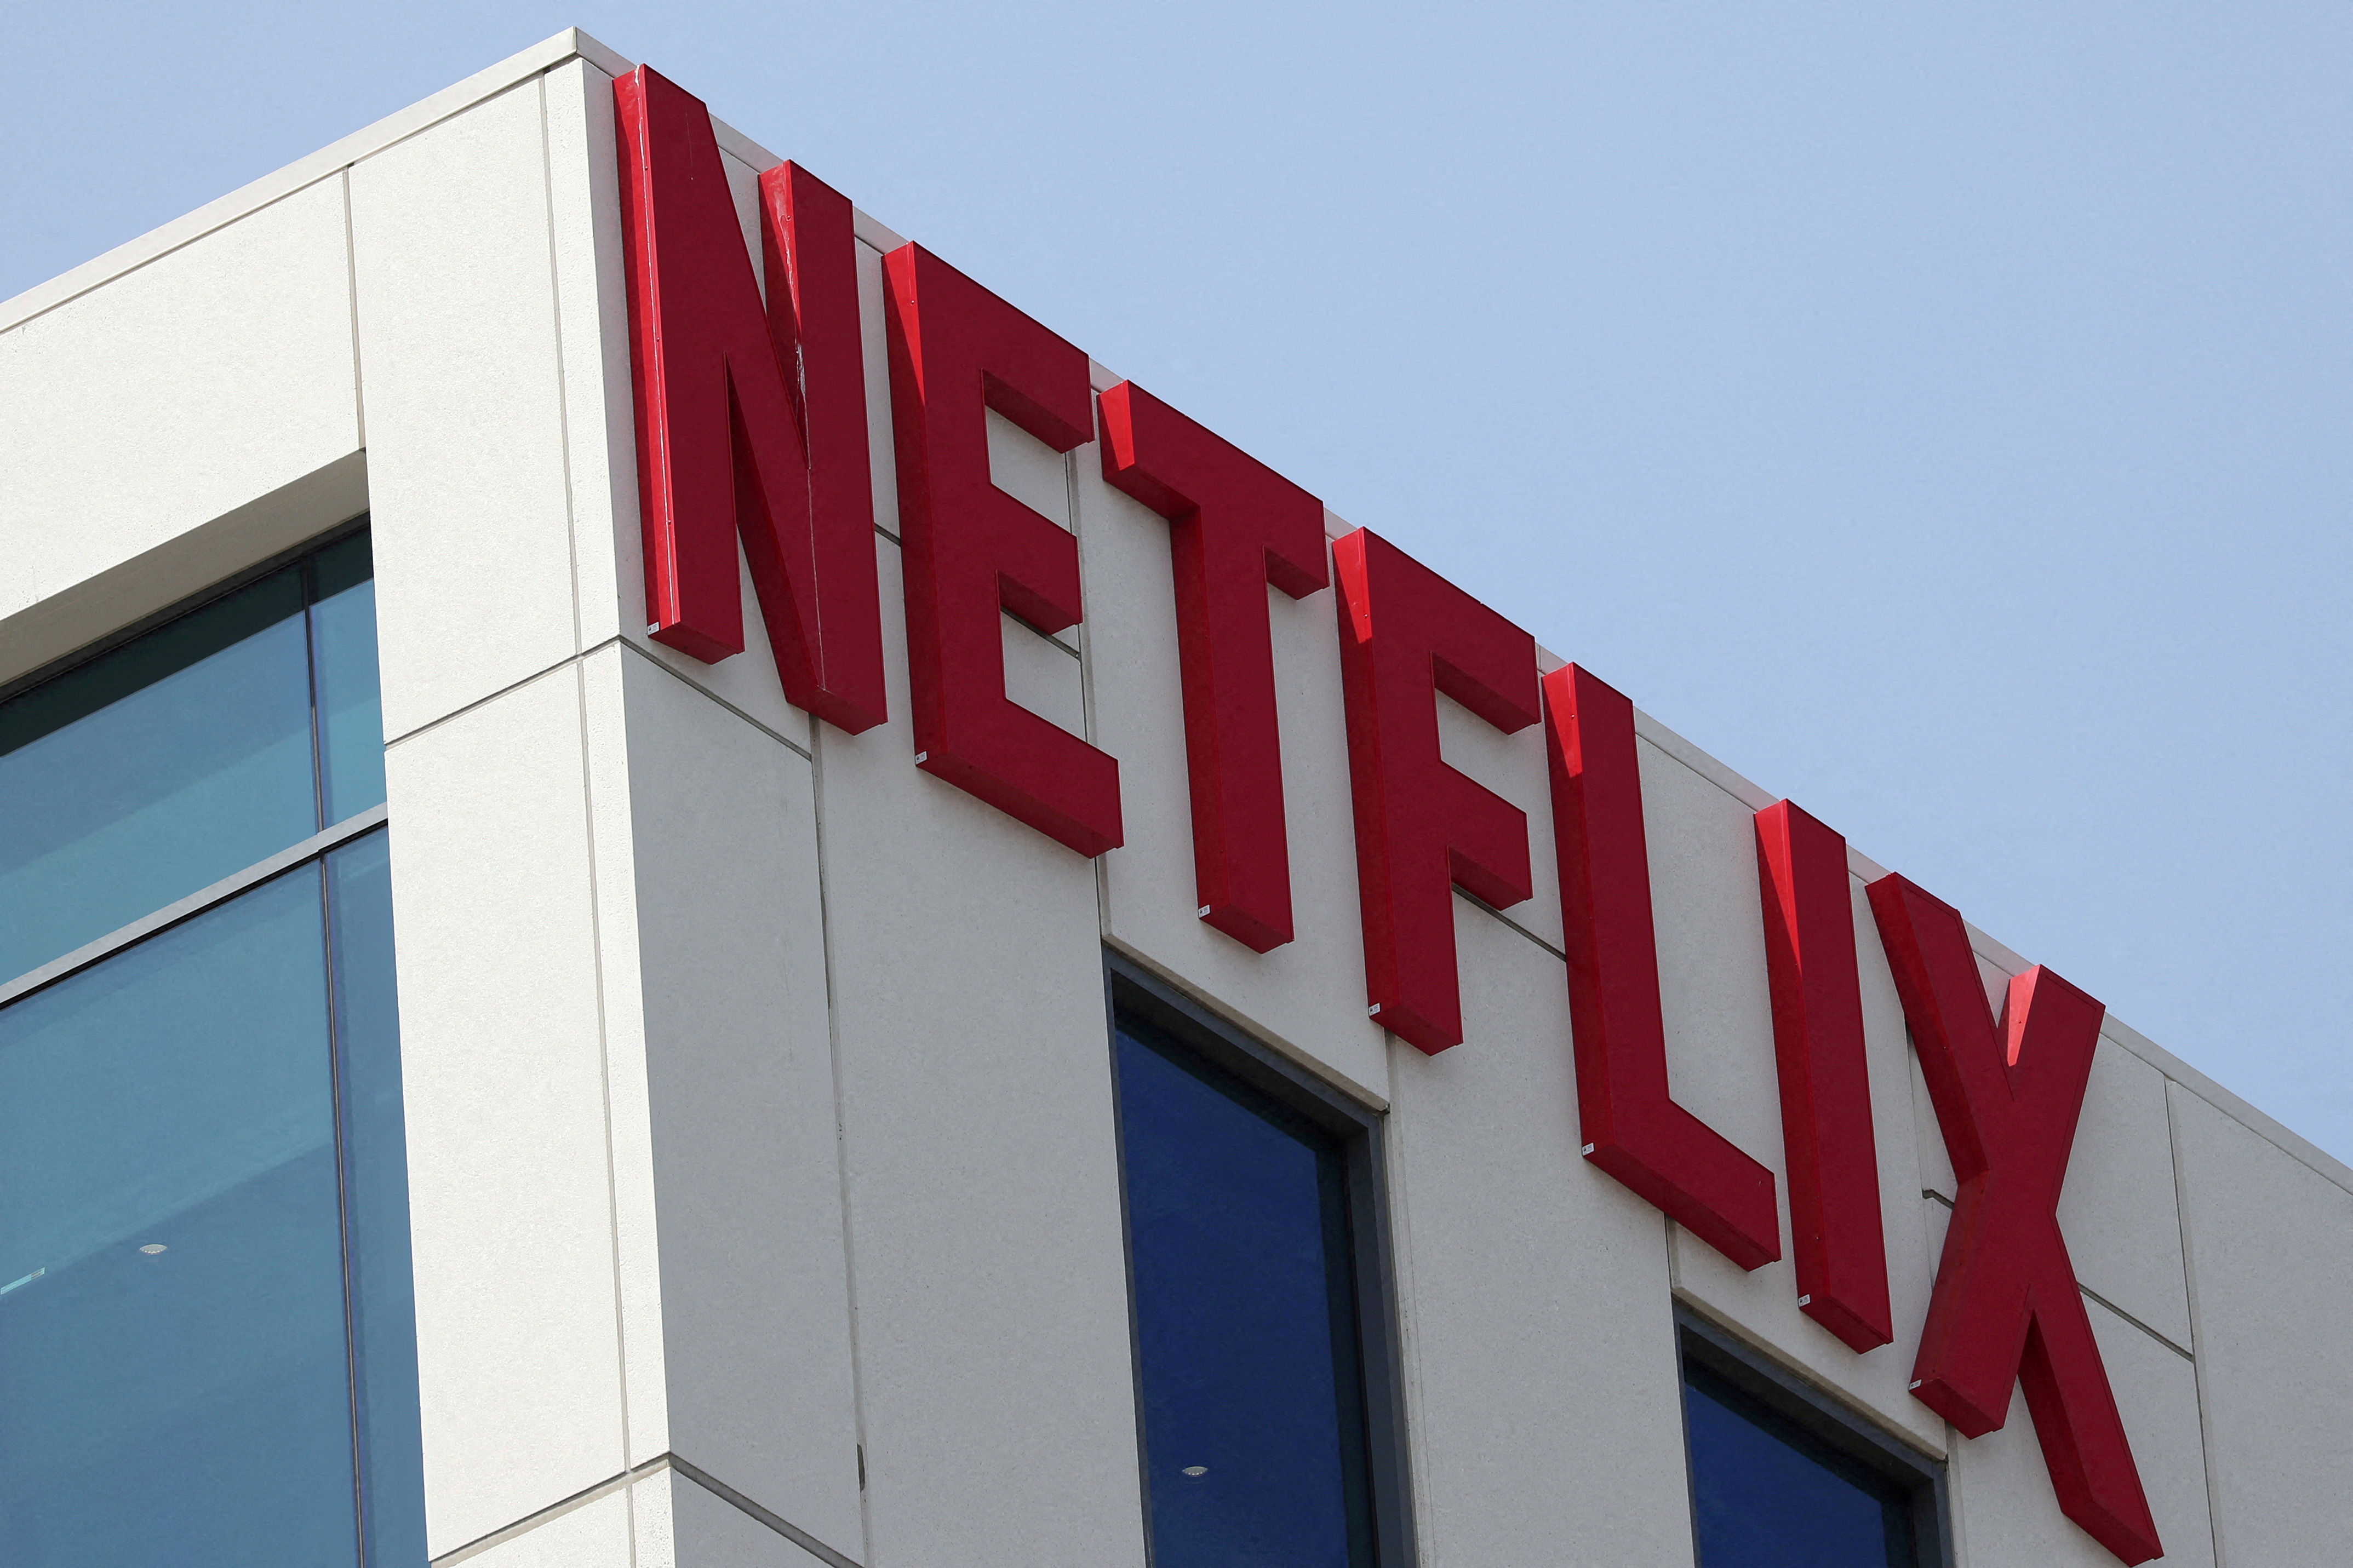 The Netflix logo is seen on their office in Hollywood, Los Angeles